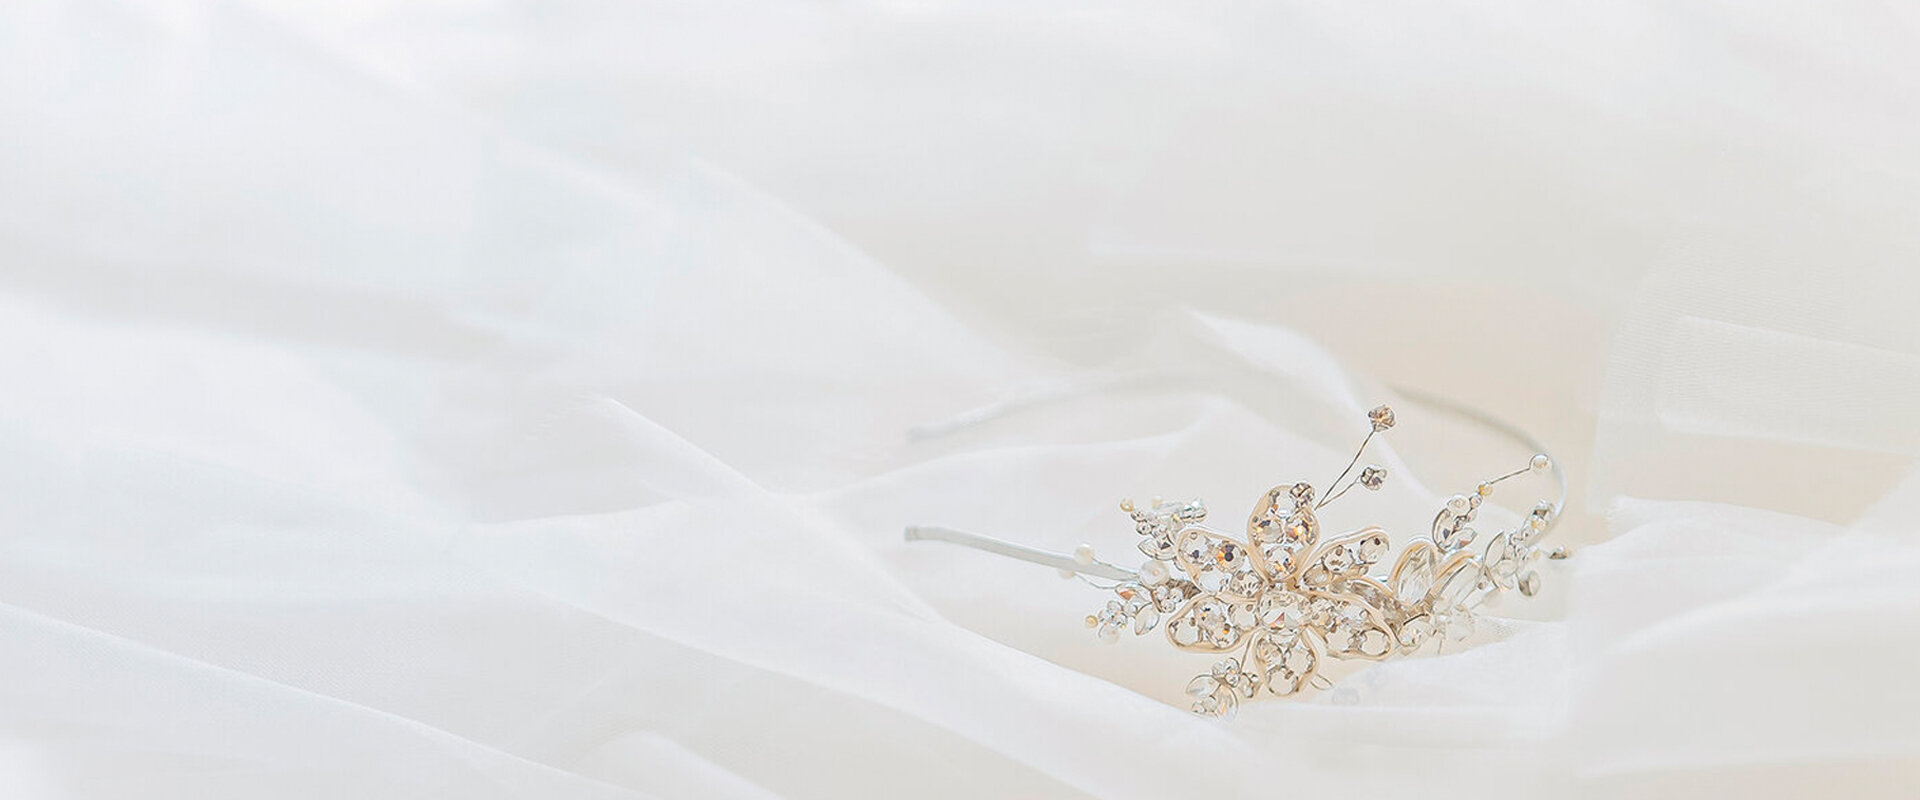 A diamond brooch to complete a bridal look